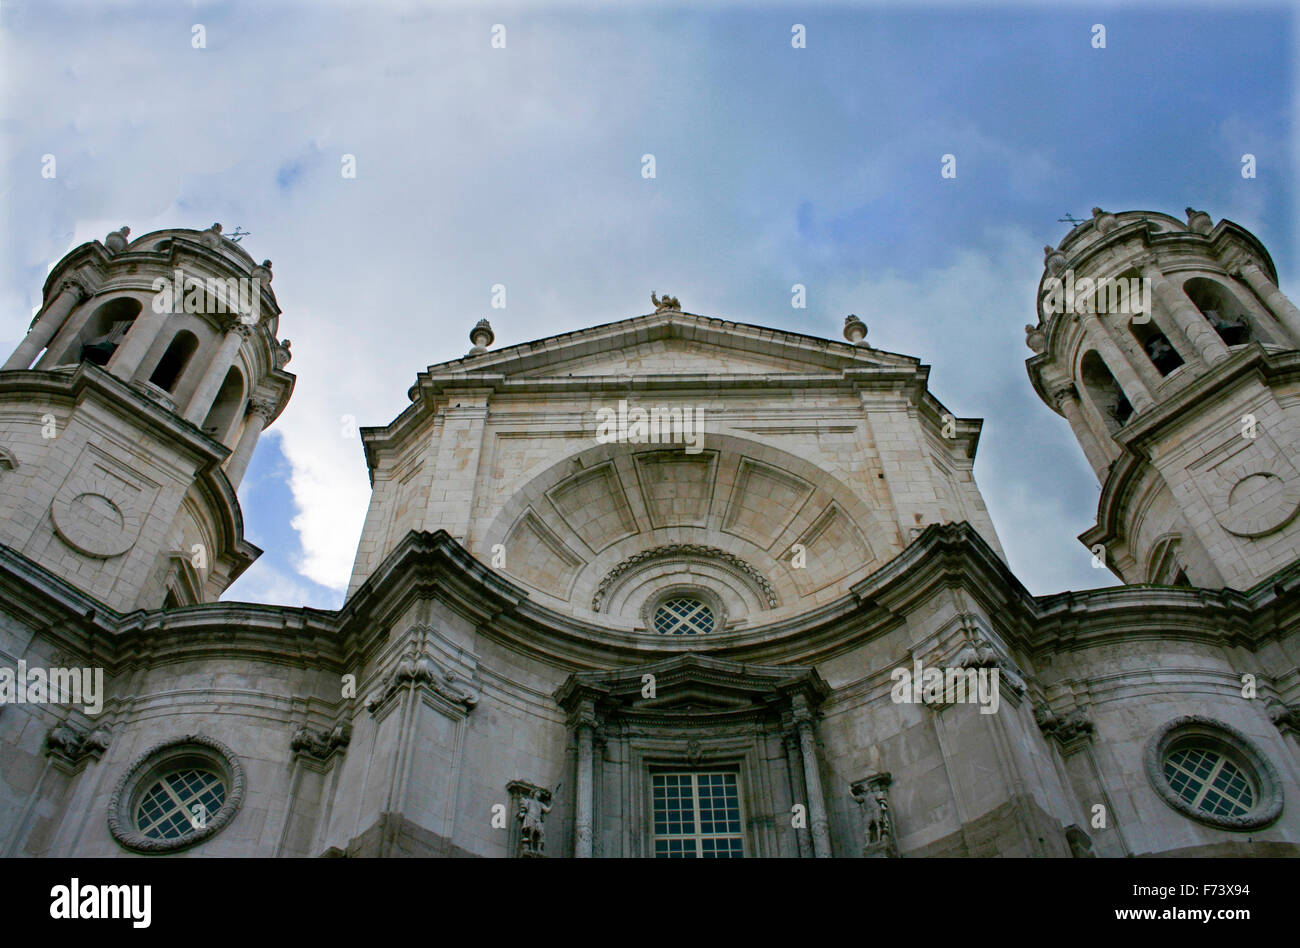 Cathedral of neoclassical style of ancient city of Cadiz, Spain Stock Photo